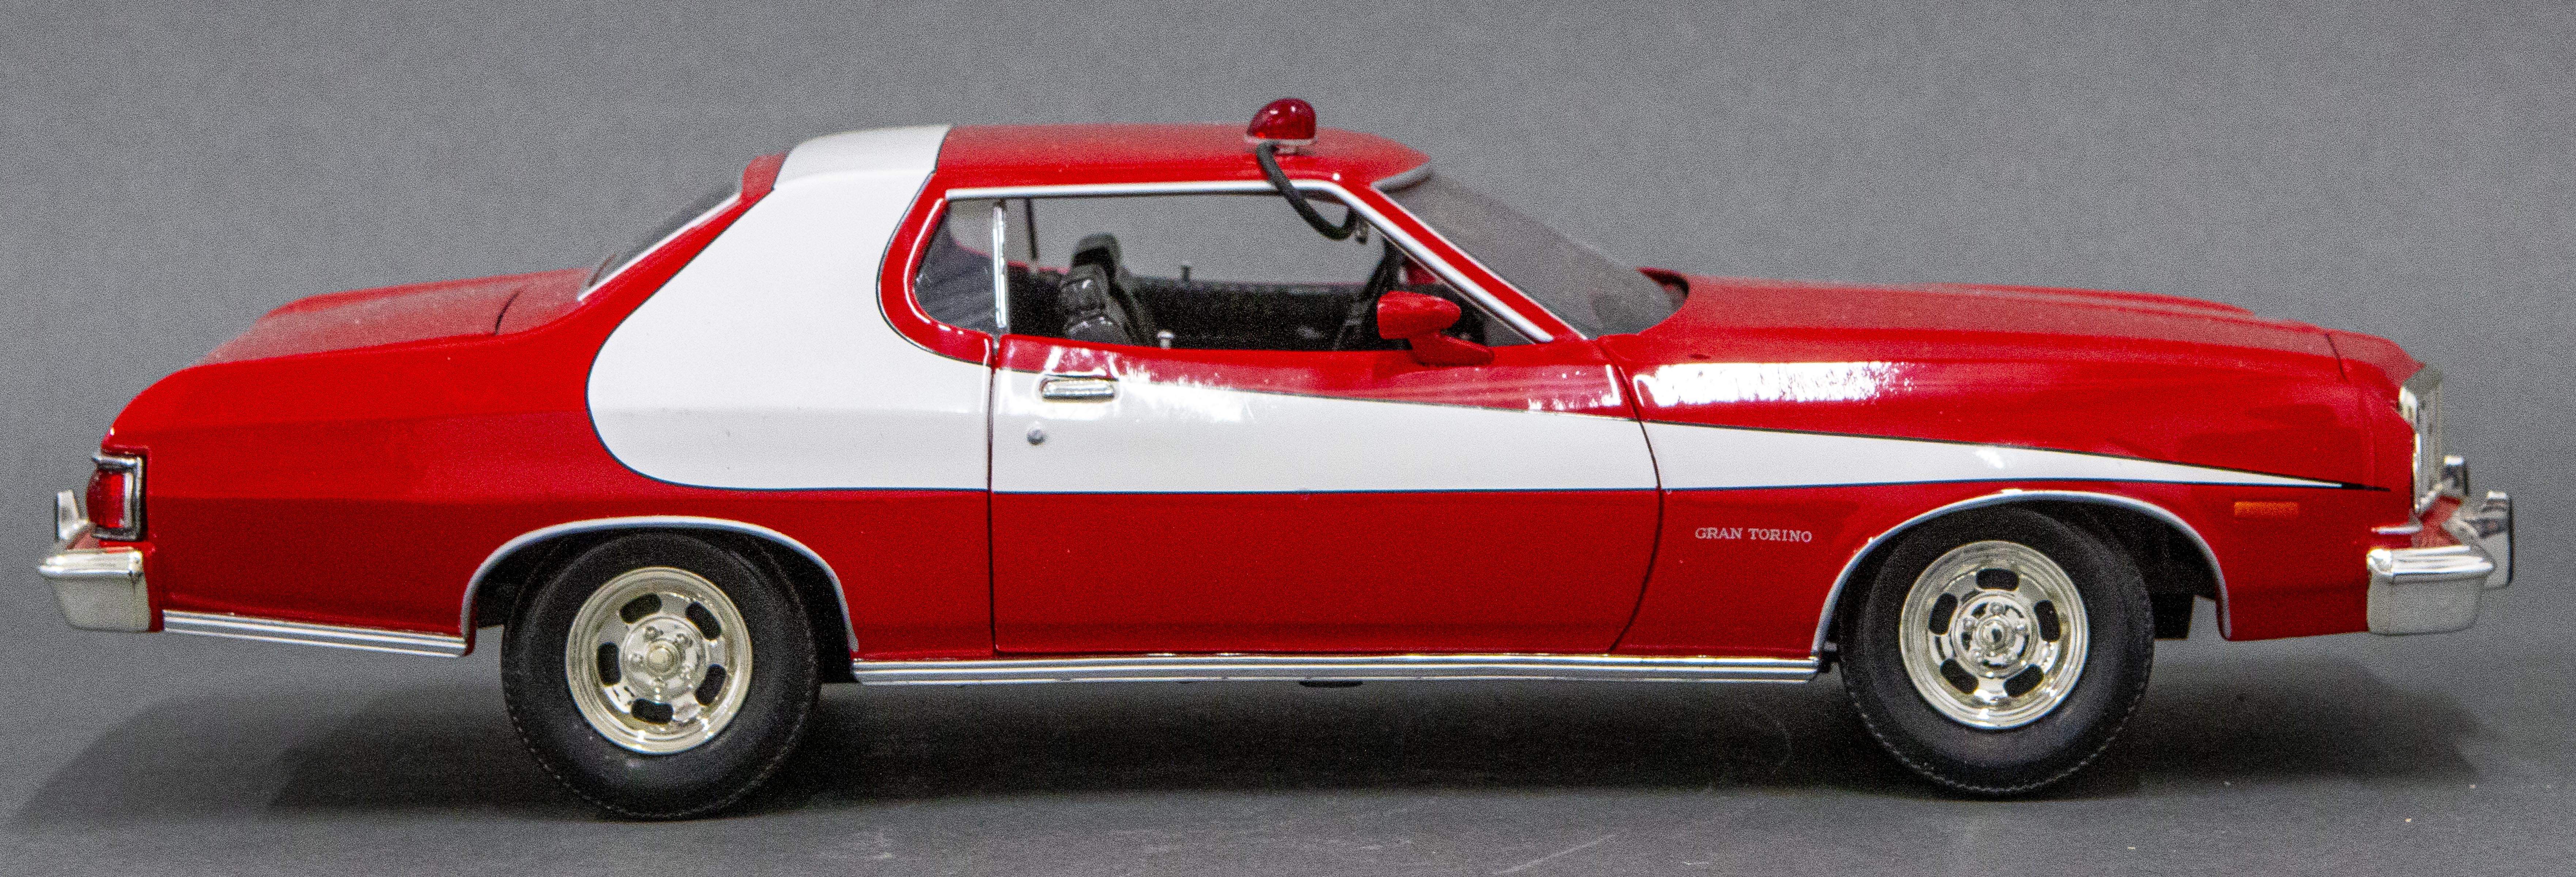 STARSKY AND HUTCH 1976 FORD GRAN 3c4586